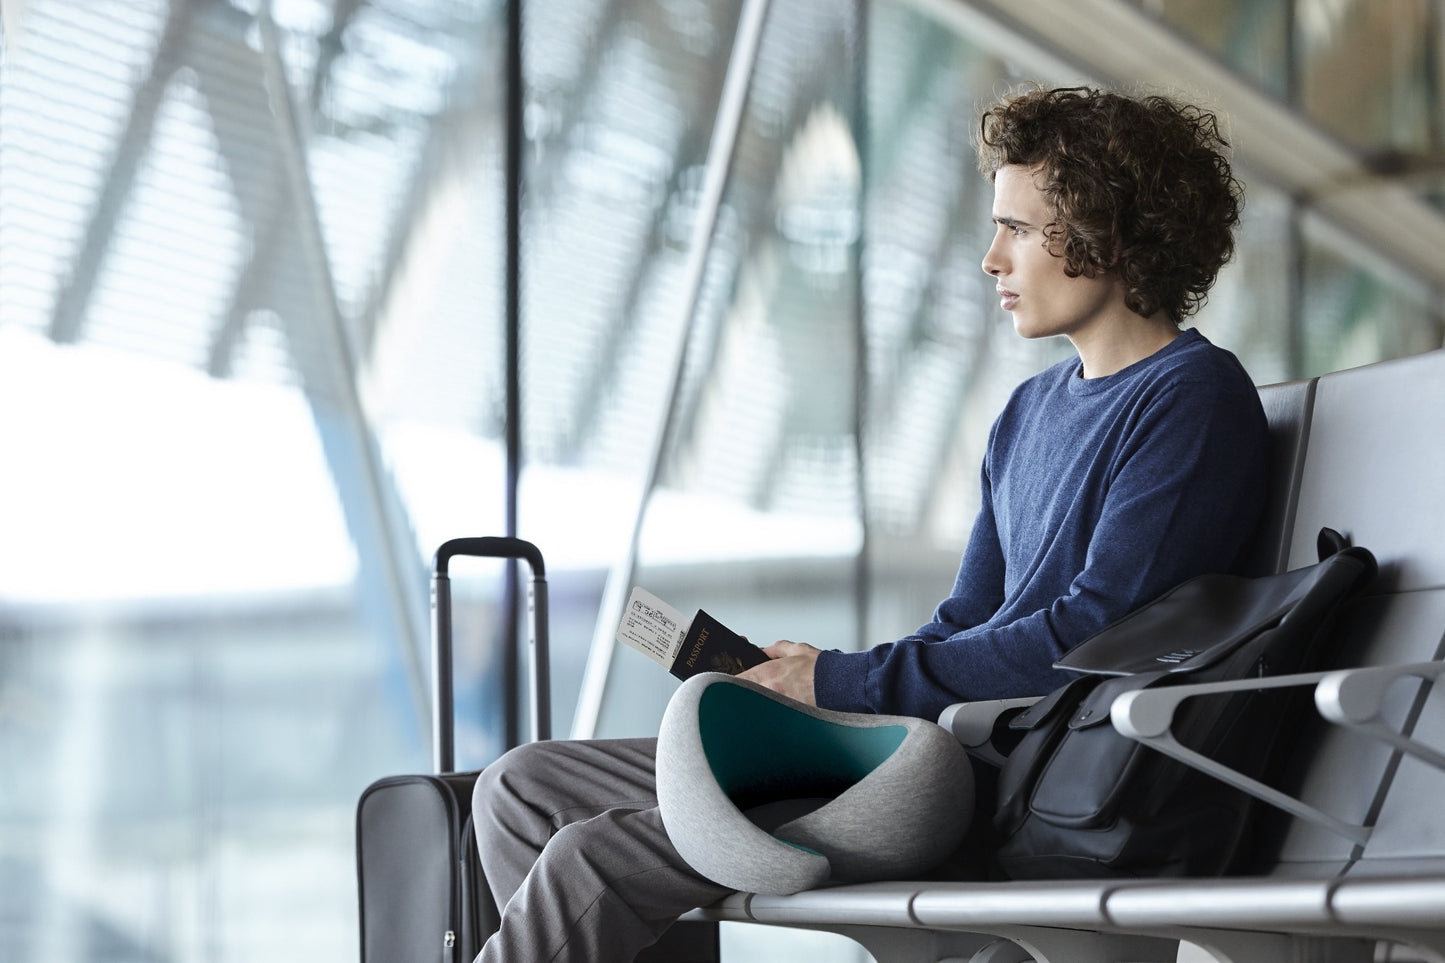 Man Waiting For Flight With Neck Pillow.